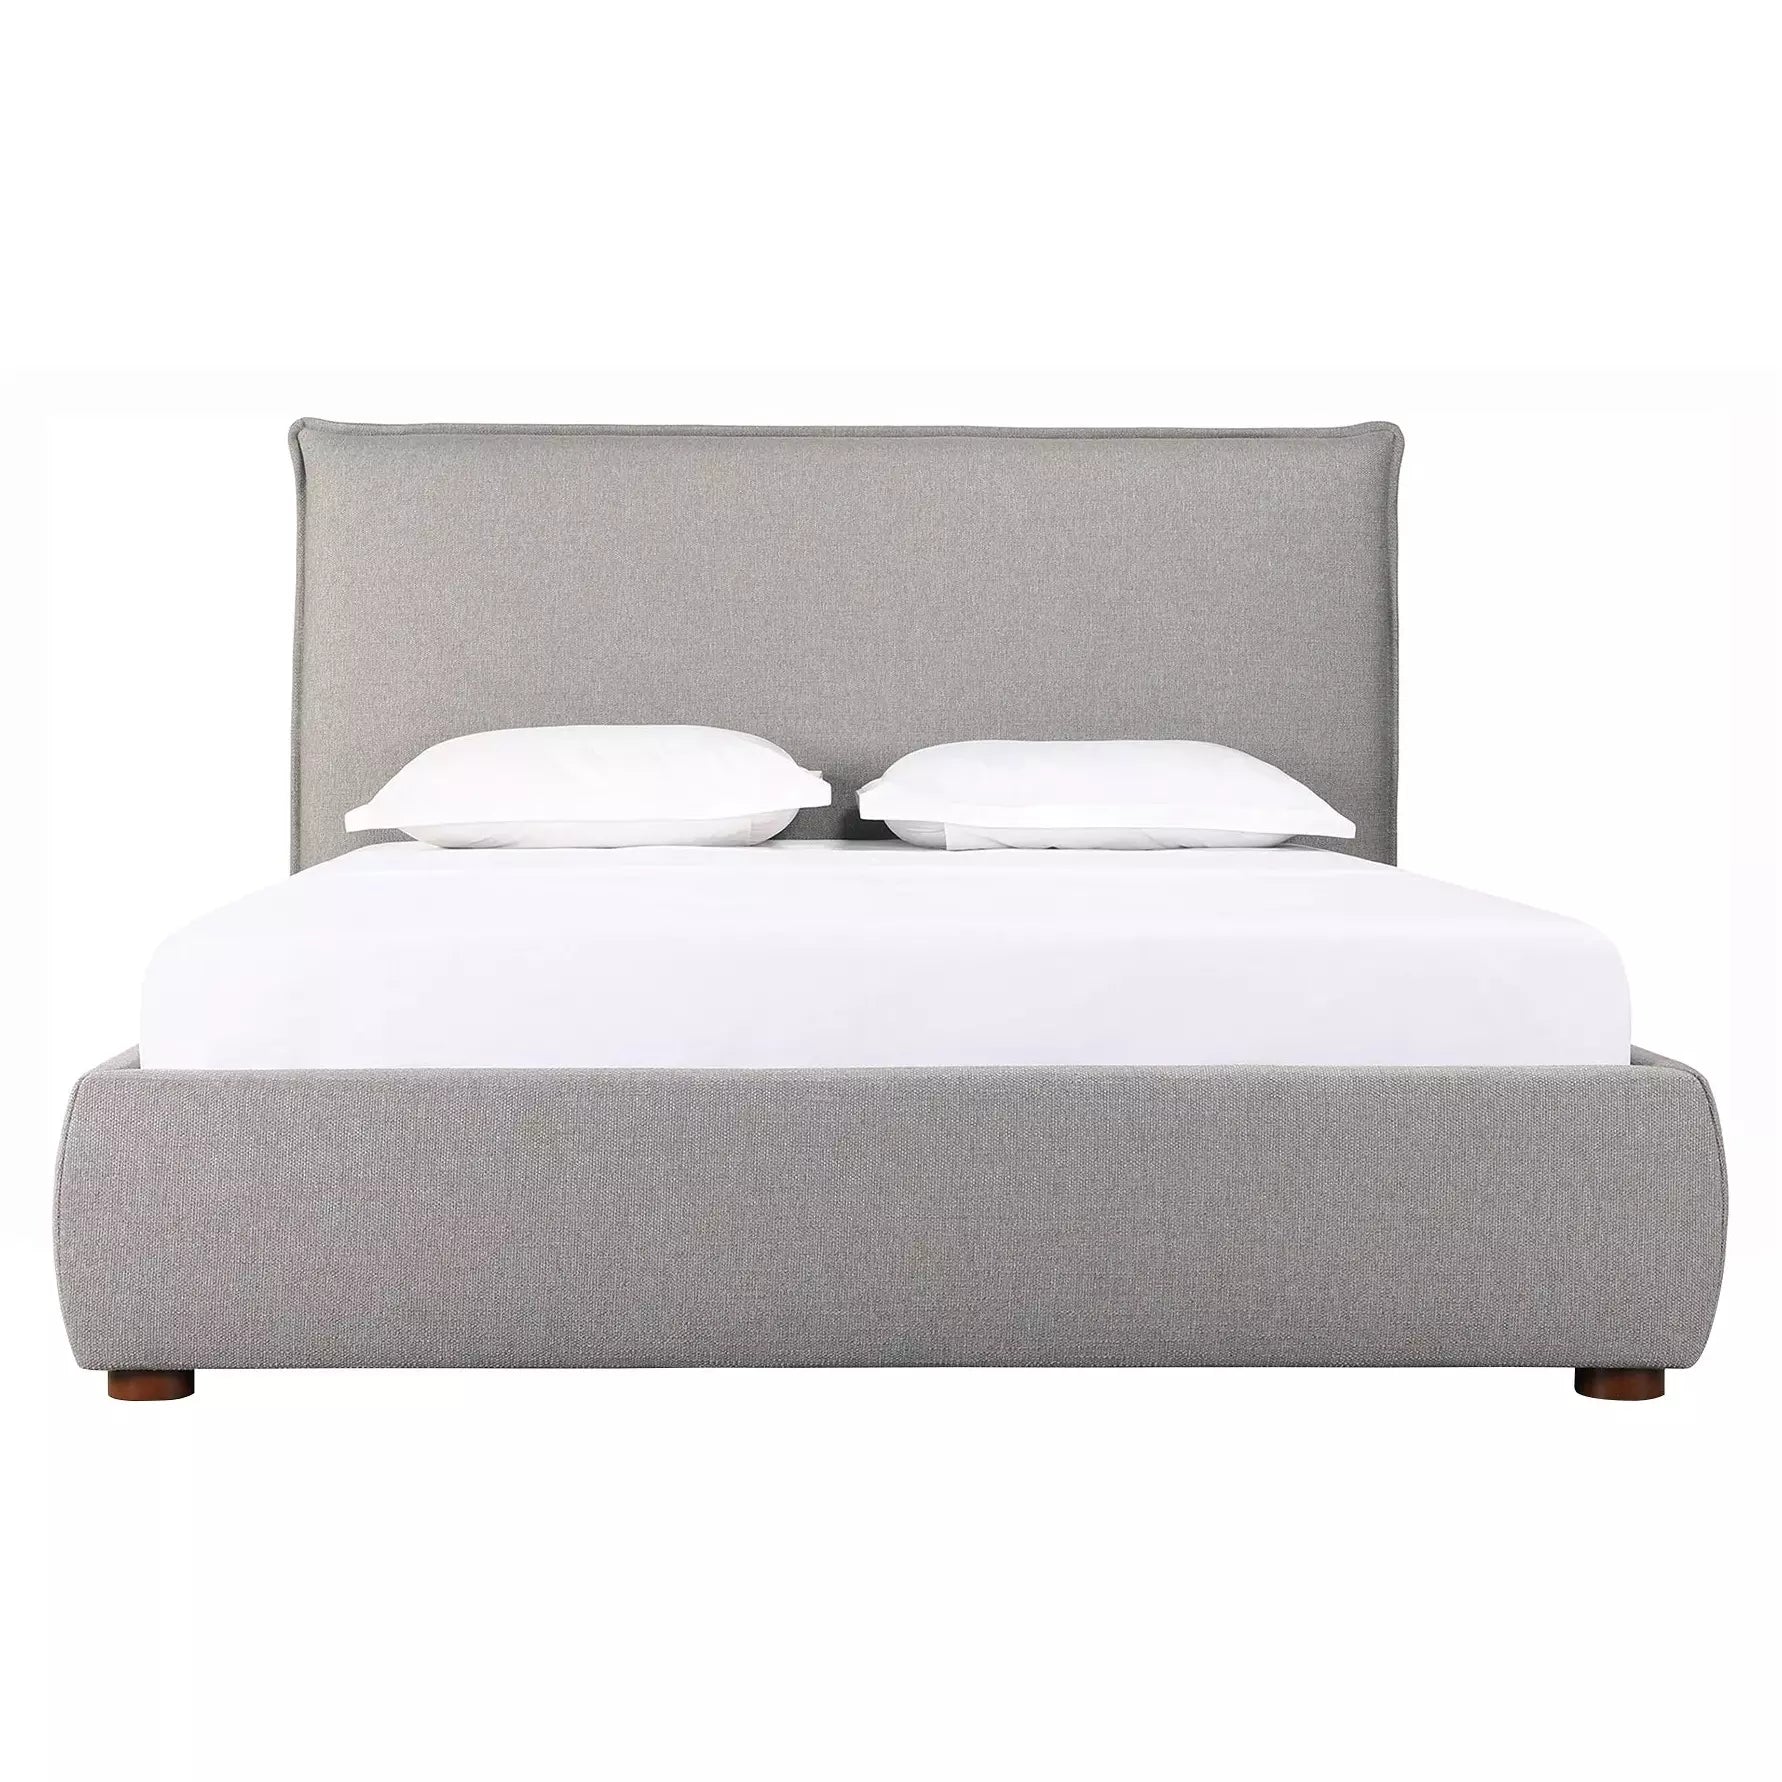 Luzon bed